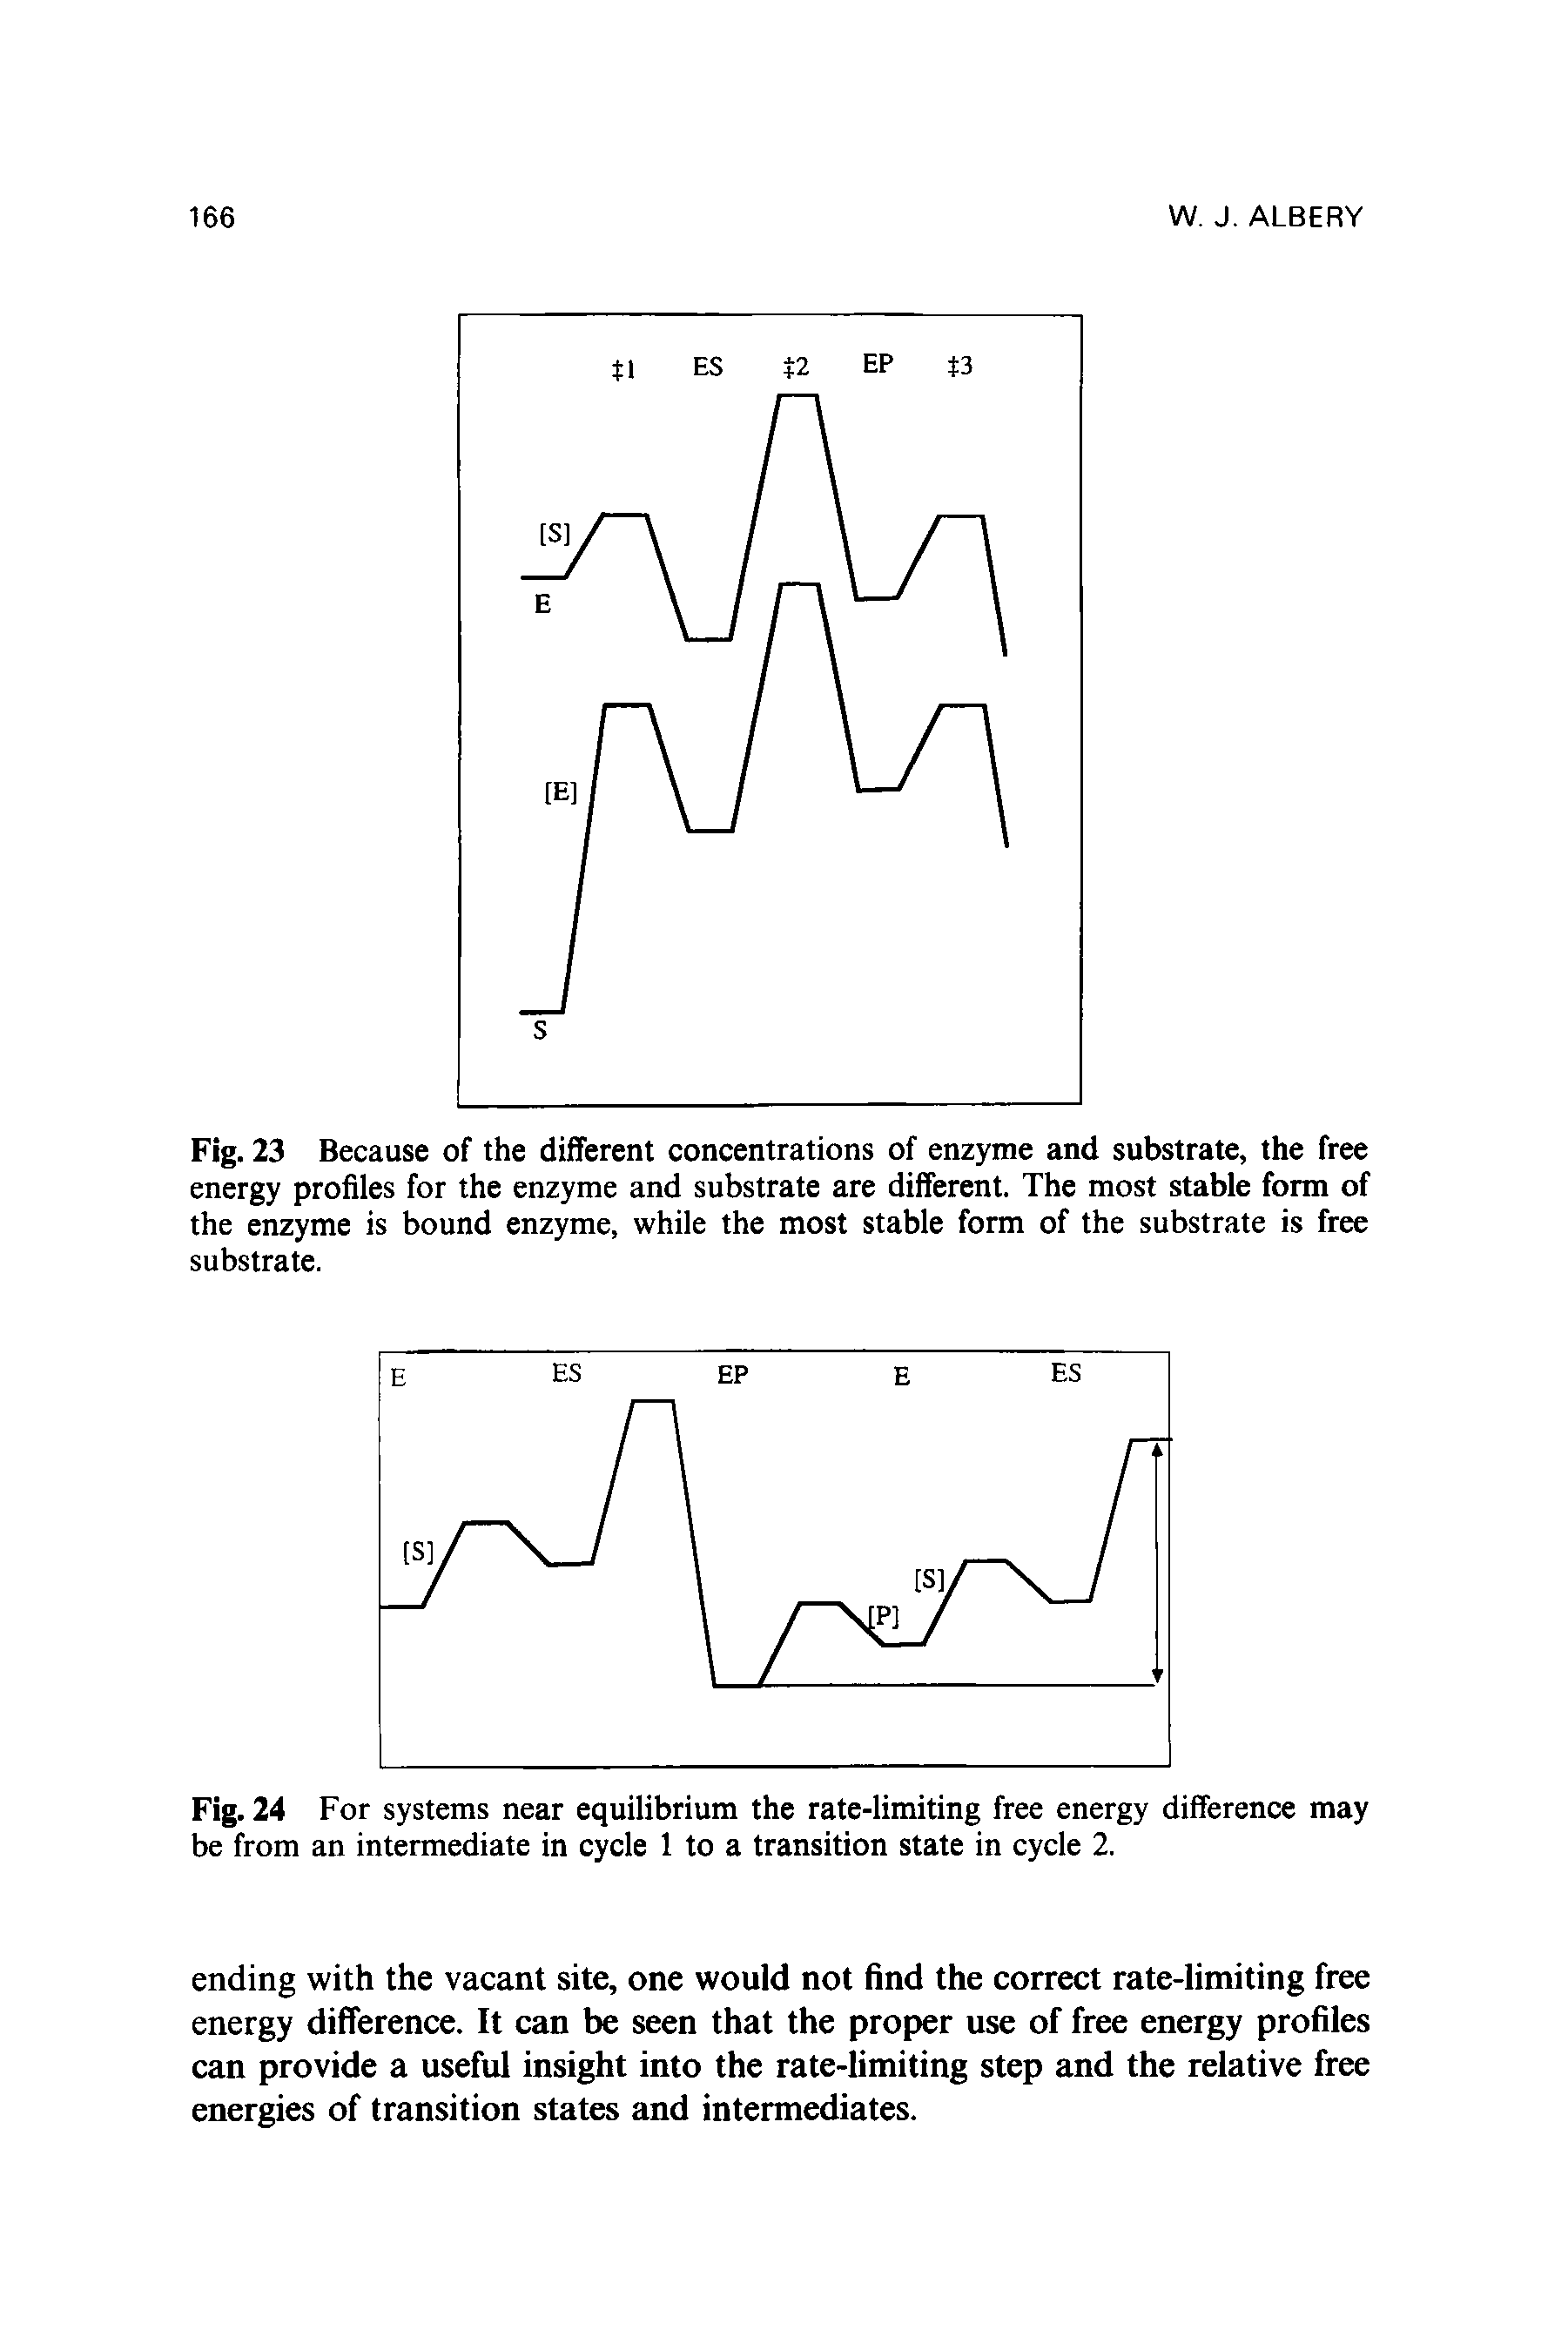 Fig. 24 For systems near equilibrium the rate-limiting free energy difference may be from an intermediate in cycle 1 to a transition state in cycle 2.